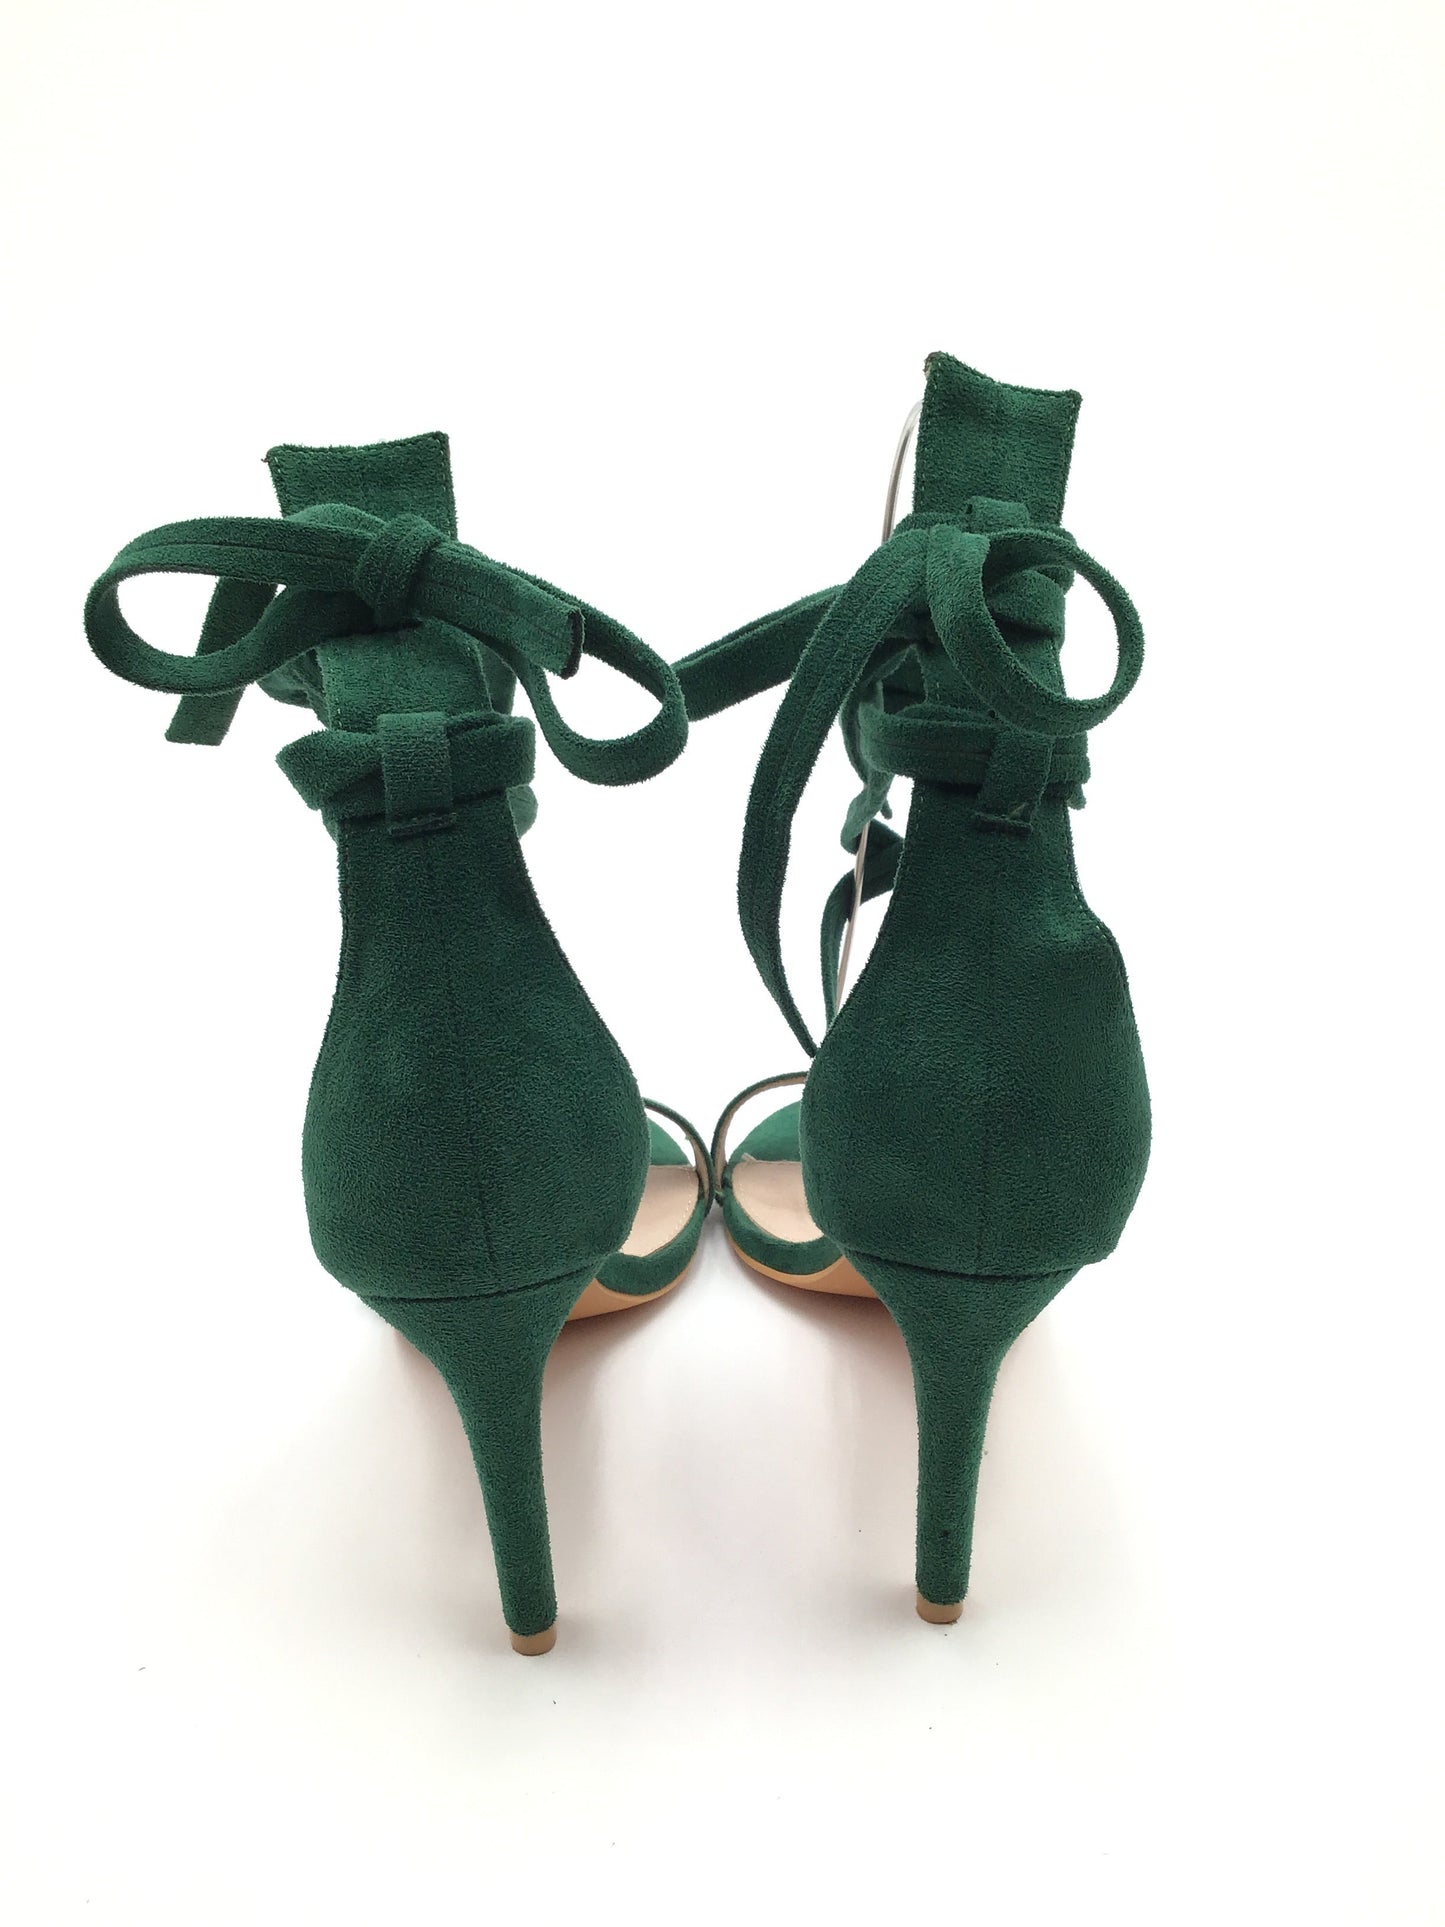 Green Sandals Heels Stiletto Clothes Mentor, Size 10